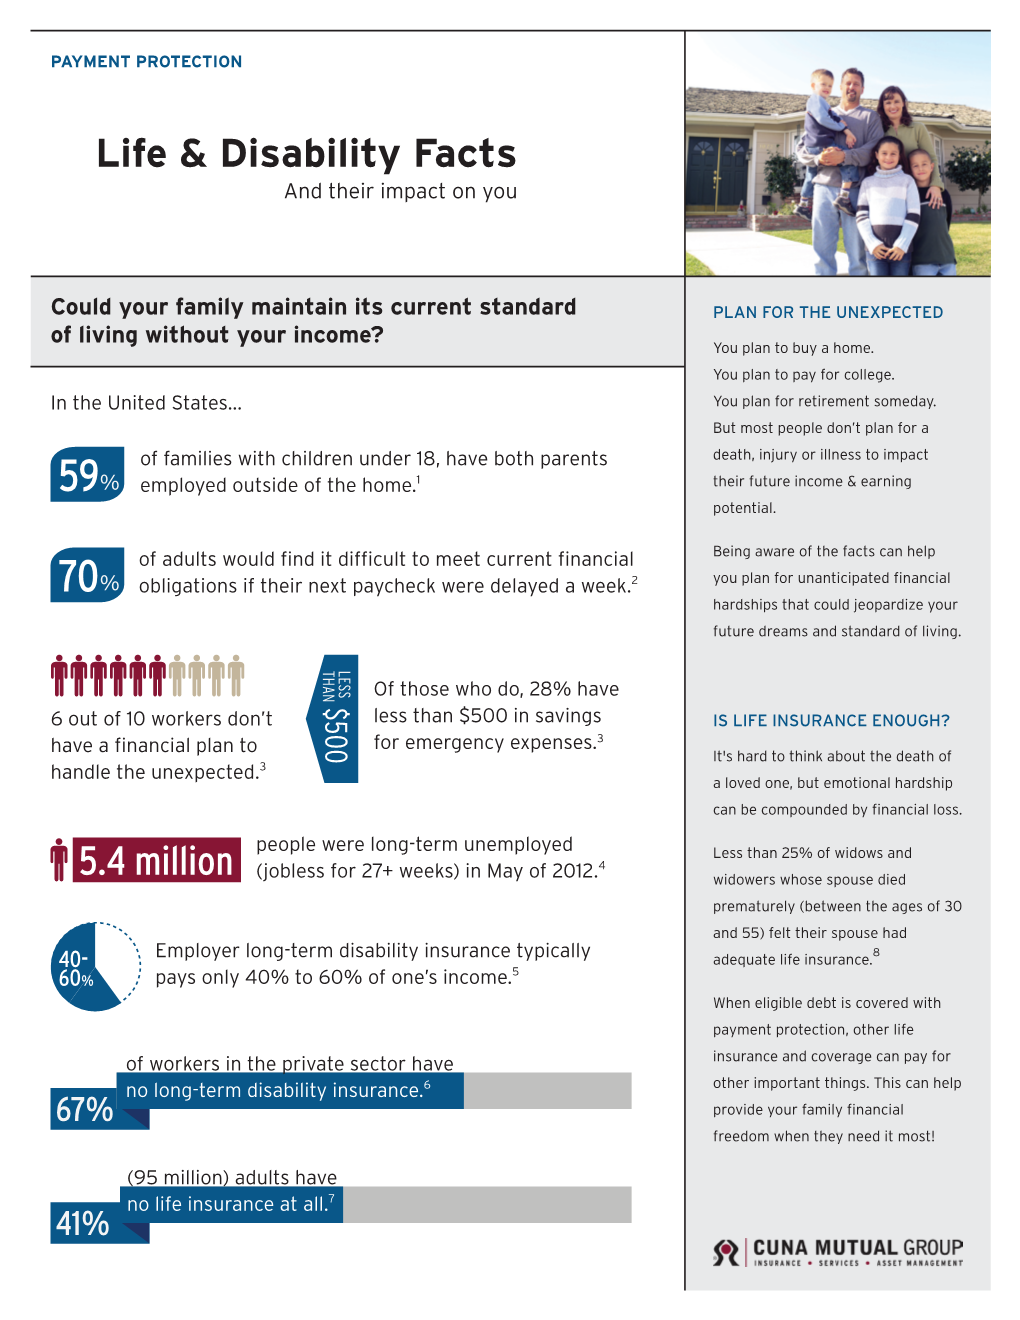 Life & Disability Facts